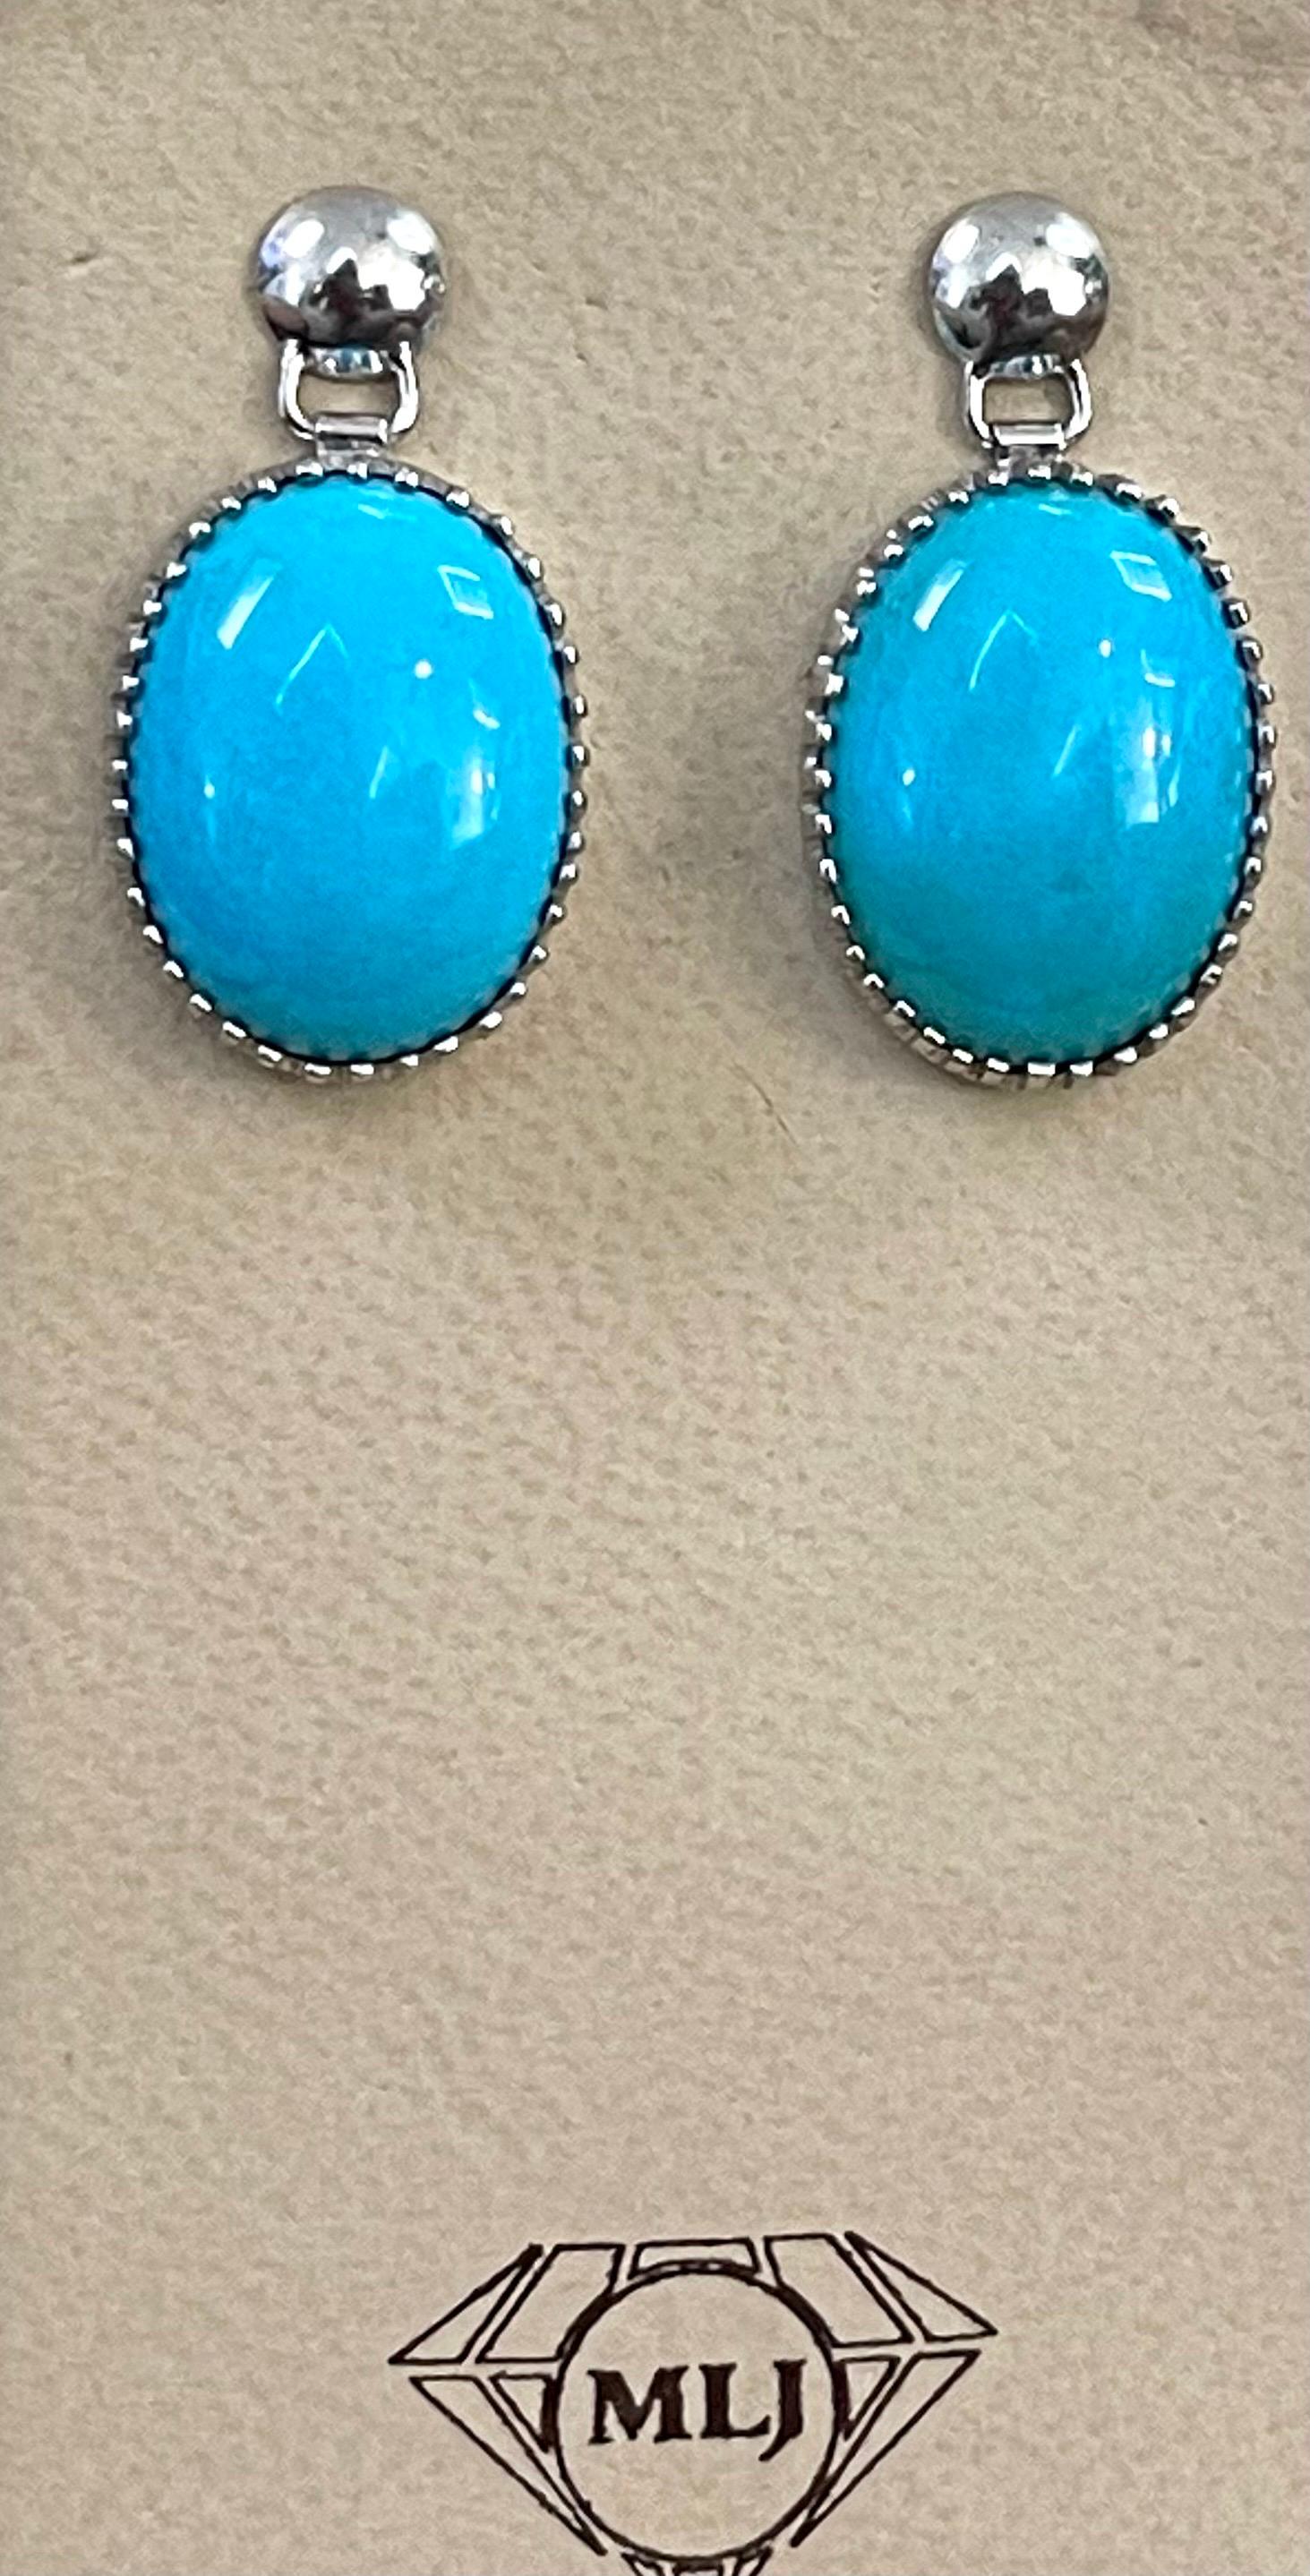 22 Carat Natural Sleeping Beauty Turquoise Cocktail Earring 18 Karat White Gold In Excellent Condition For Sale In New York, NY